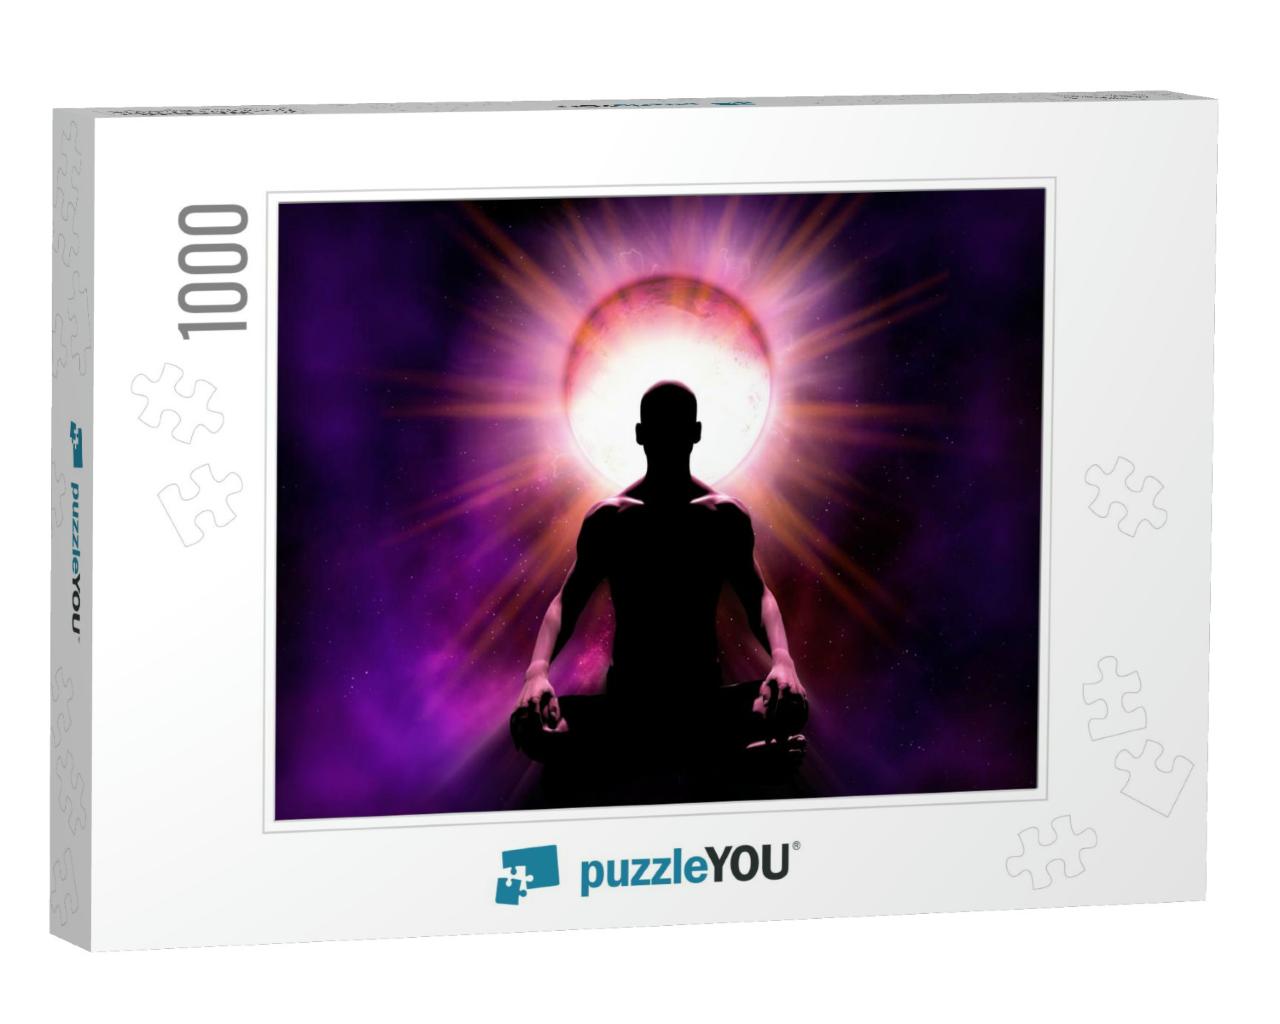 Universal Psychic Mind Power of Meditation. the Silhouett... Jigsaw Puzzle with 1000 pieces